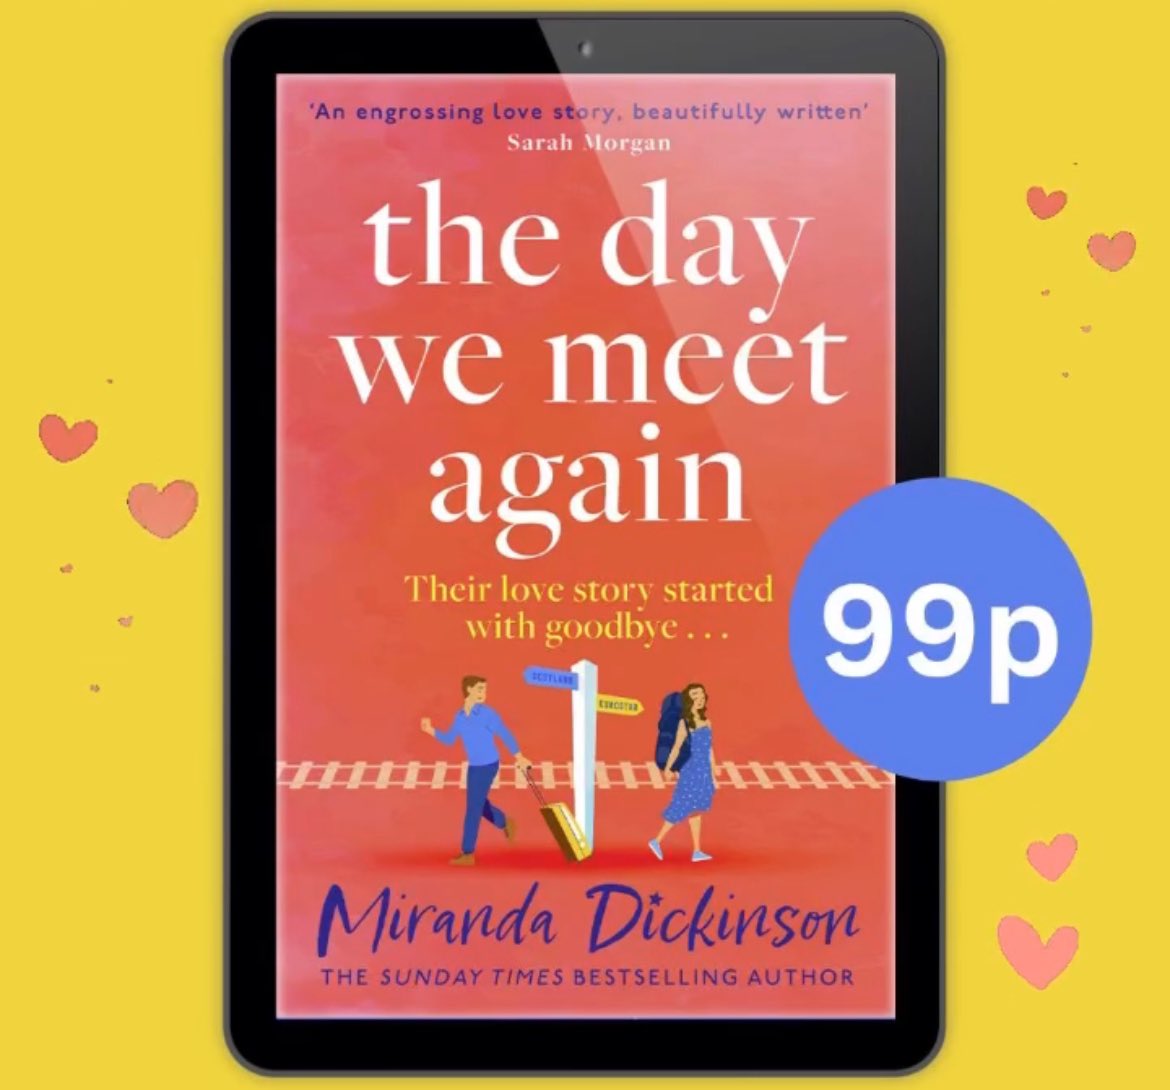 An epic love story. Her journey across Europe. His to uncover his past on Mull. And the promise they make to meet again… #TheDayWeMeetAgain is only 99p in ebook @AmazonKindle. Grab yours quick! 💕🇪🇺💕🏴󠁧󠁢󠁳󠁣󠁴󠁿💕 amzn.to/4aVngrh #Books